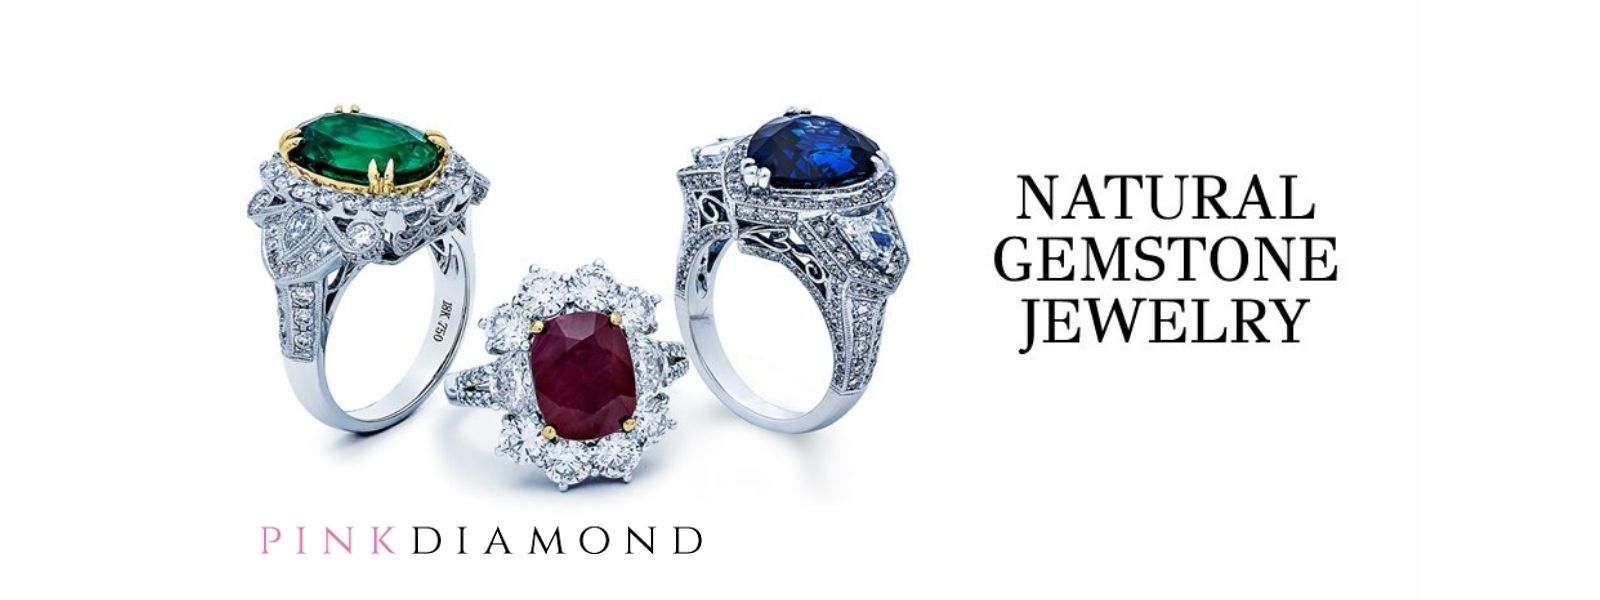 Pink Diamond; The new look of classic, featuring rubies, sapphires, emeralds, and diamonds.  Peter & Co. Jewelers Avon Lake, OH